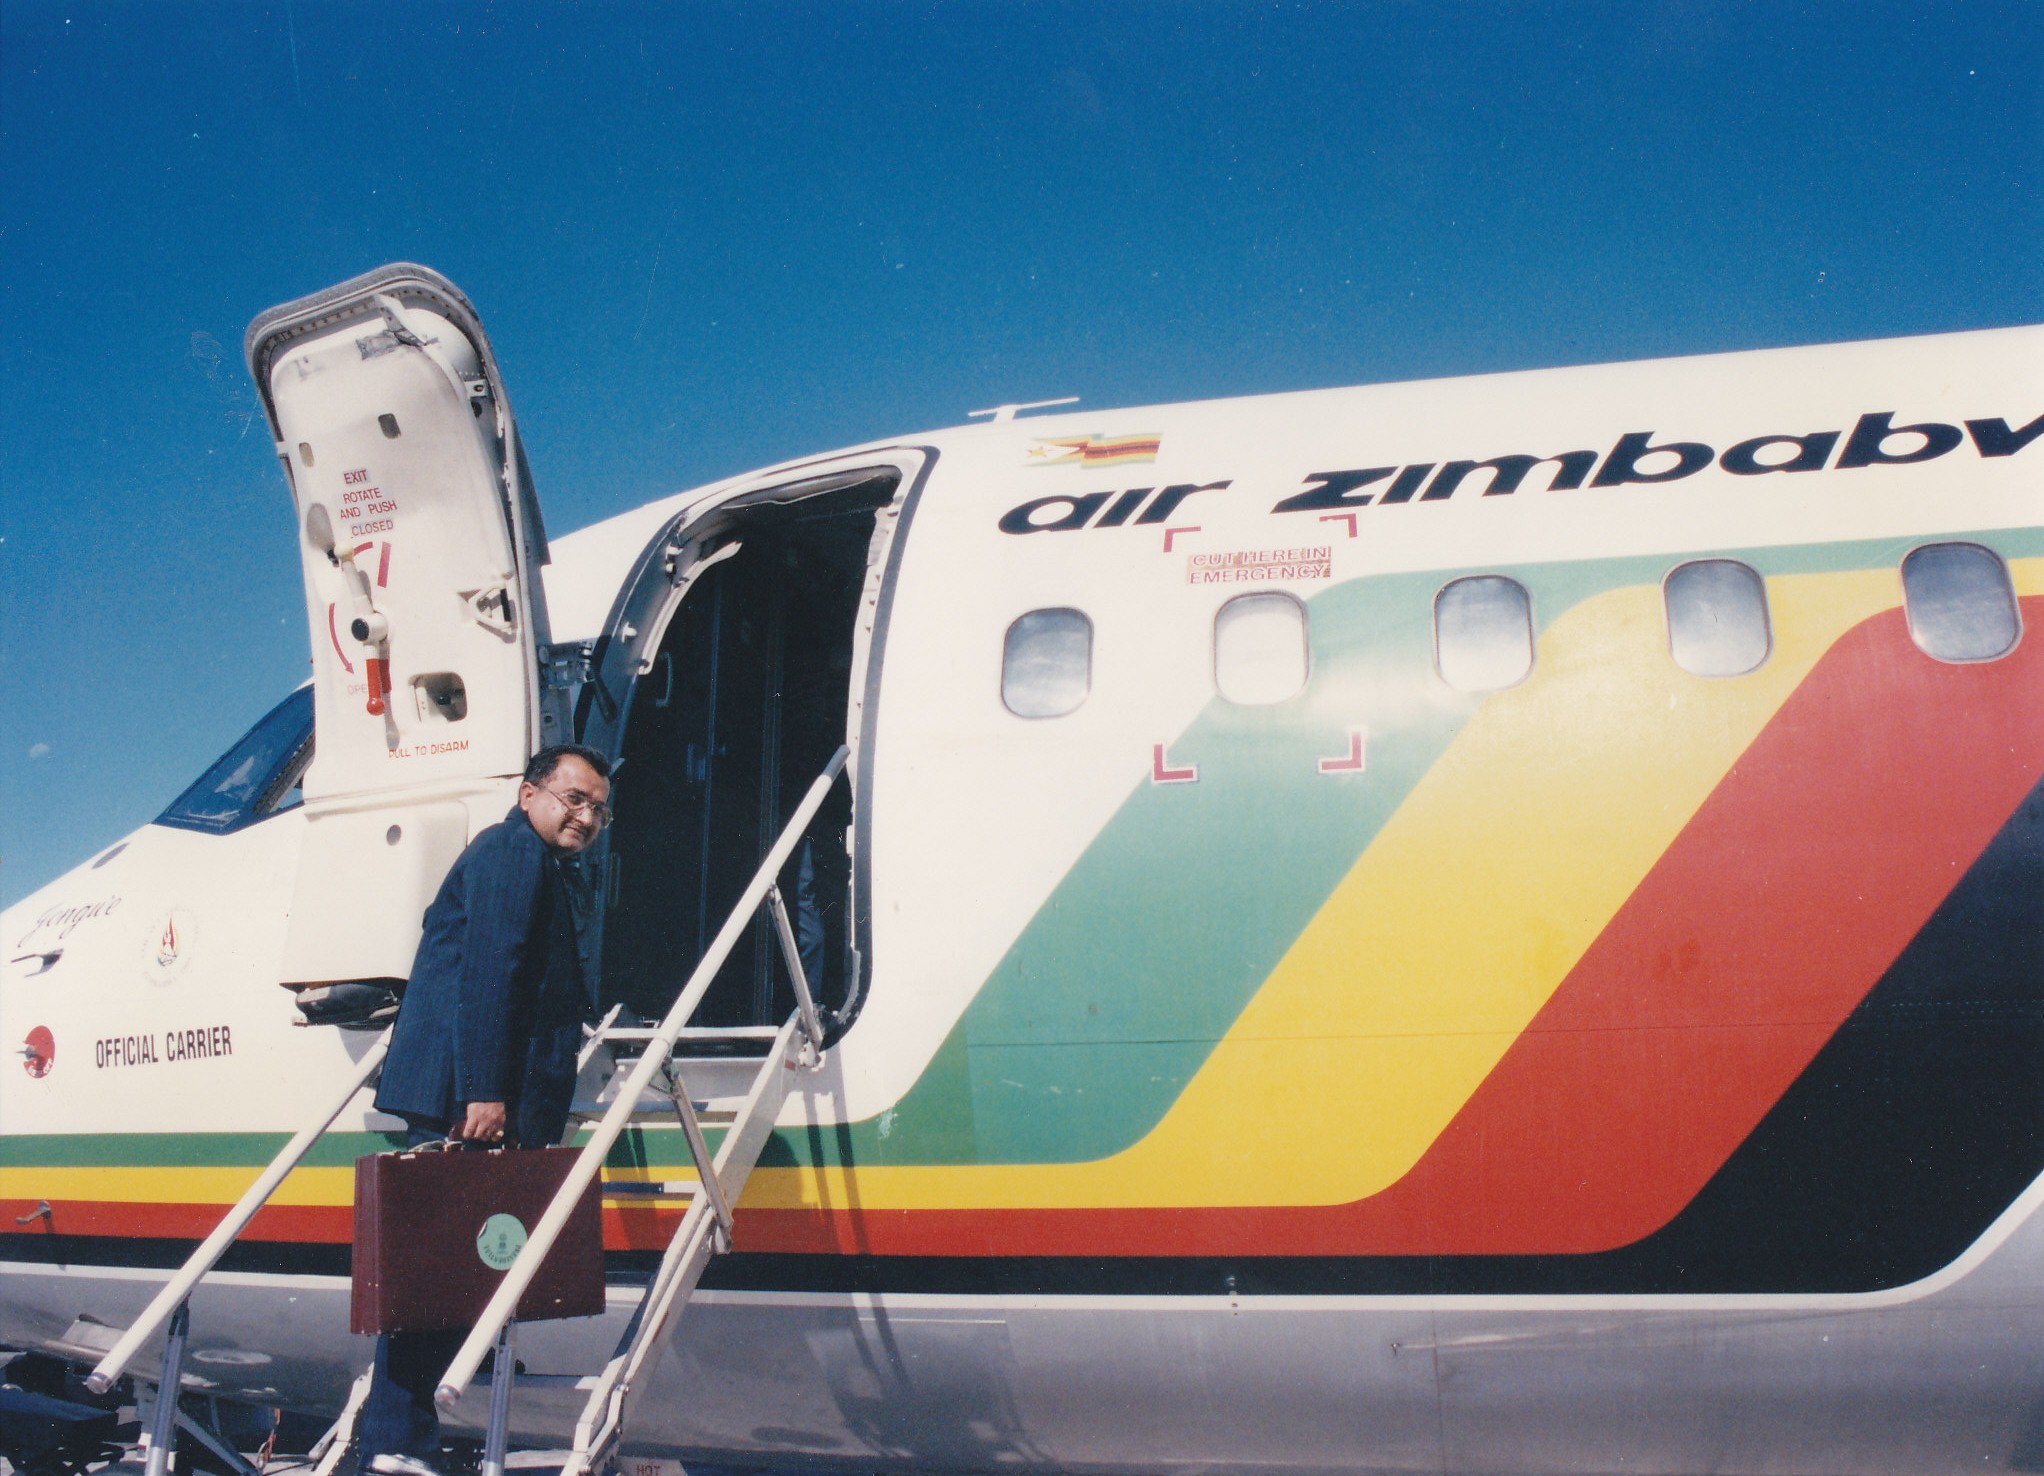 Boarding in the flight of Zimbabwe during Presidential tour 